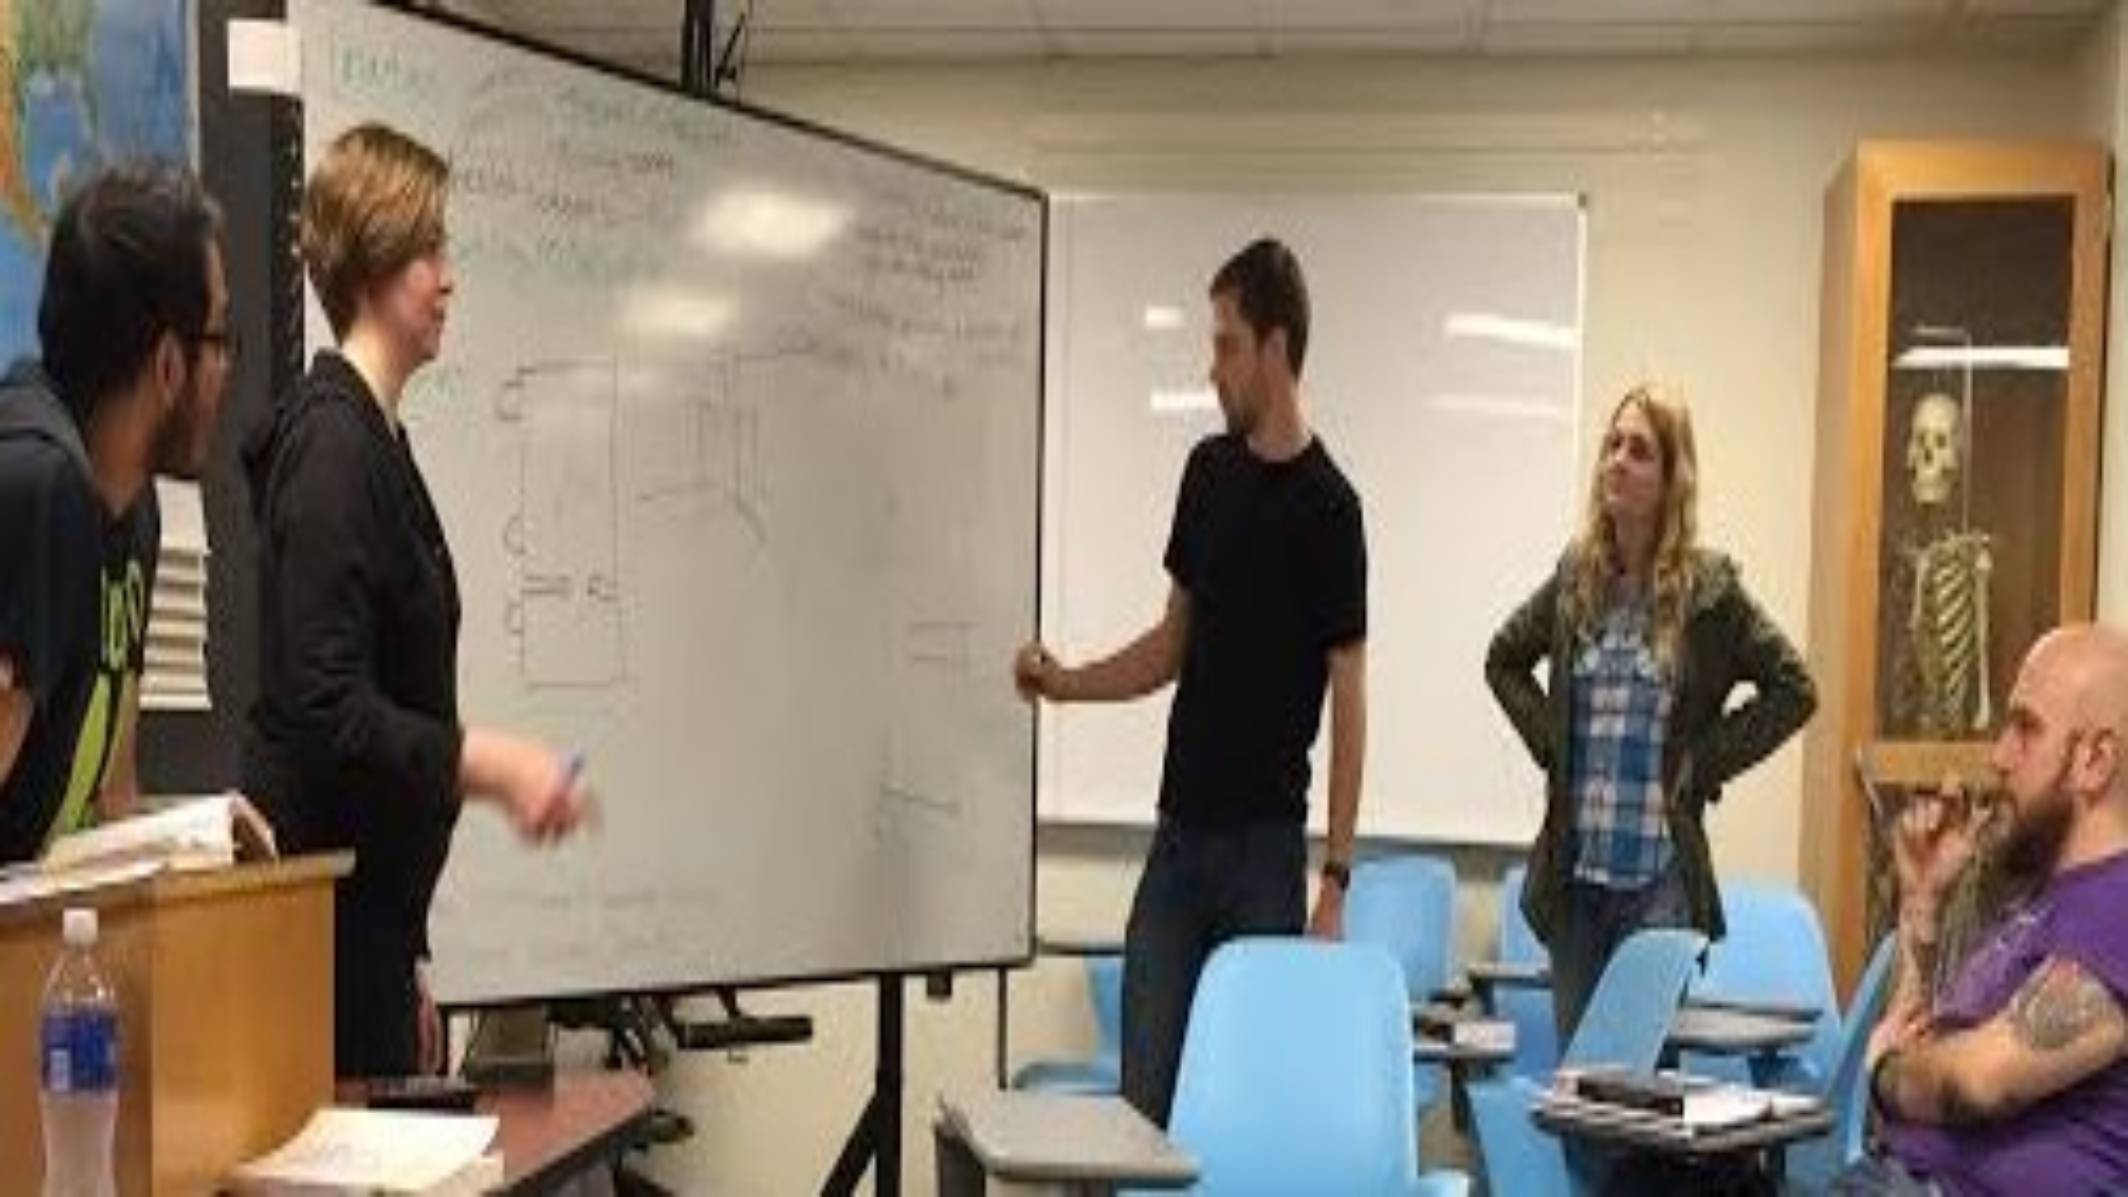 Students presenting in front of a white board.